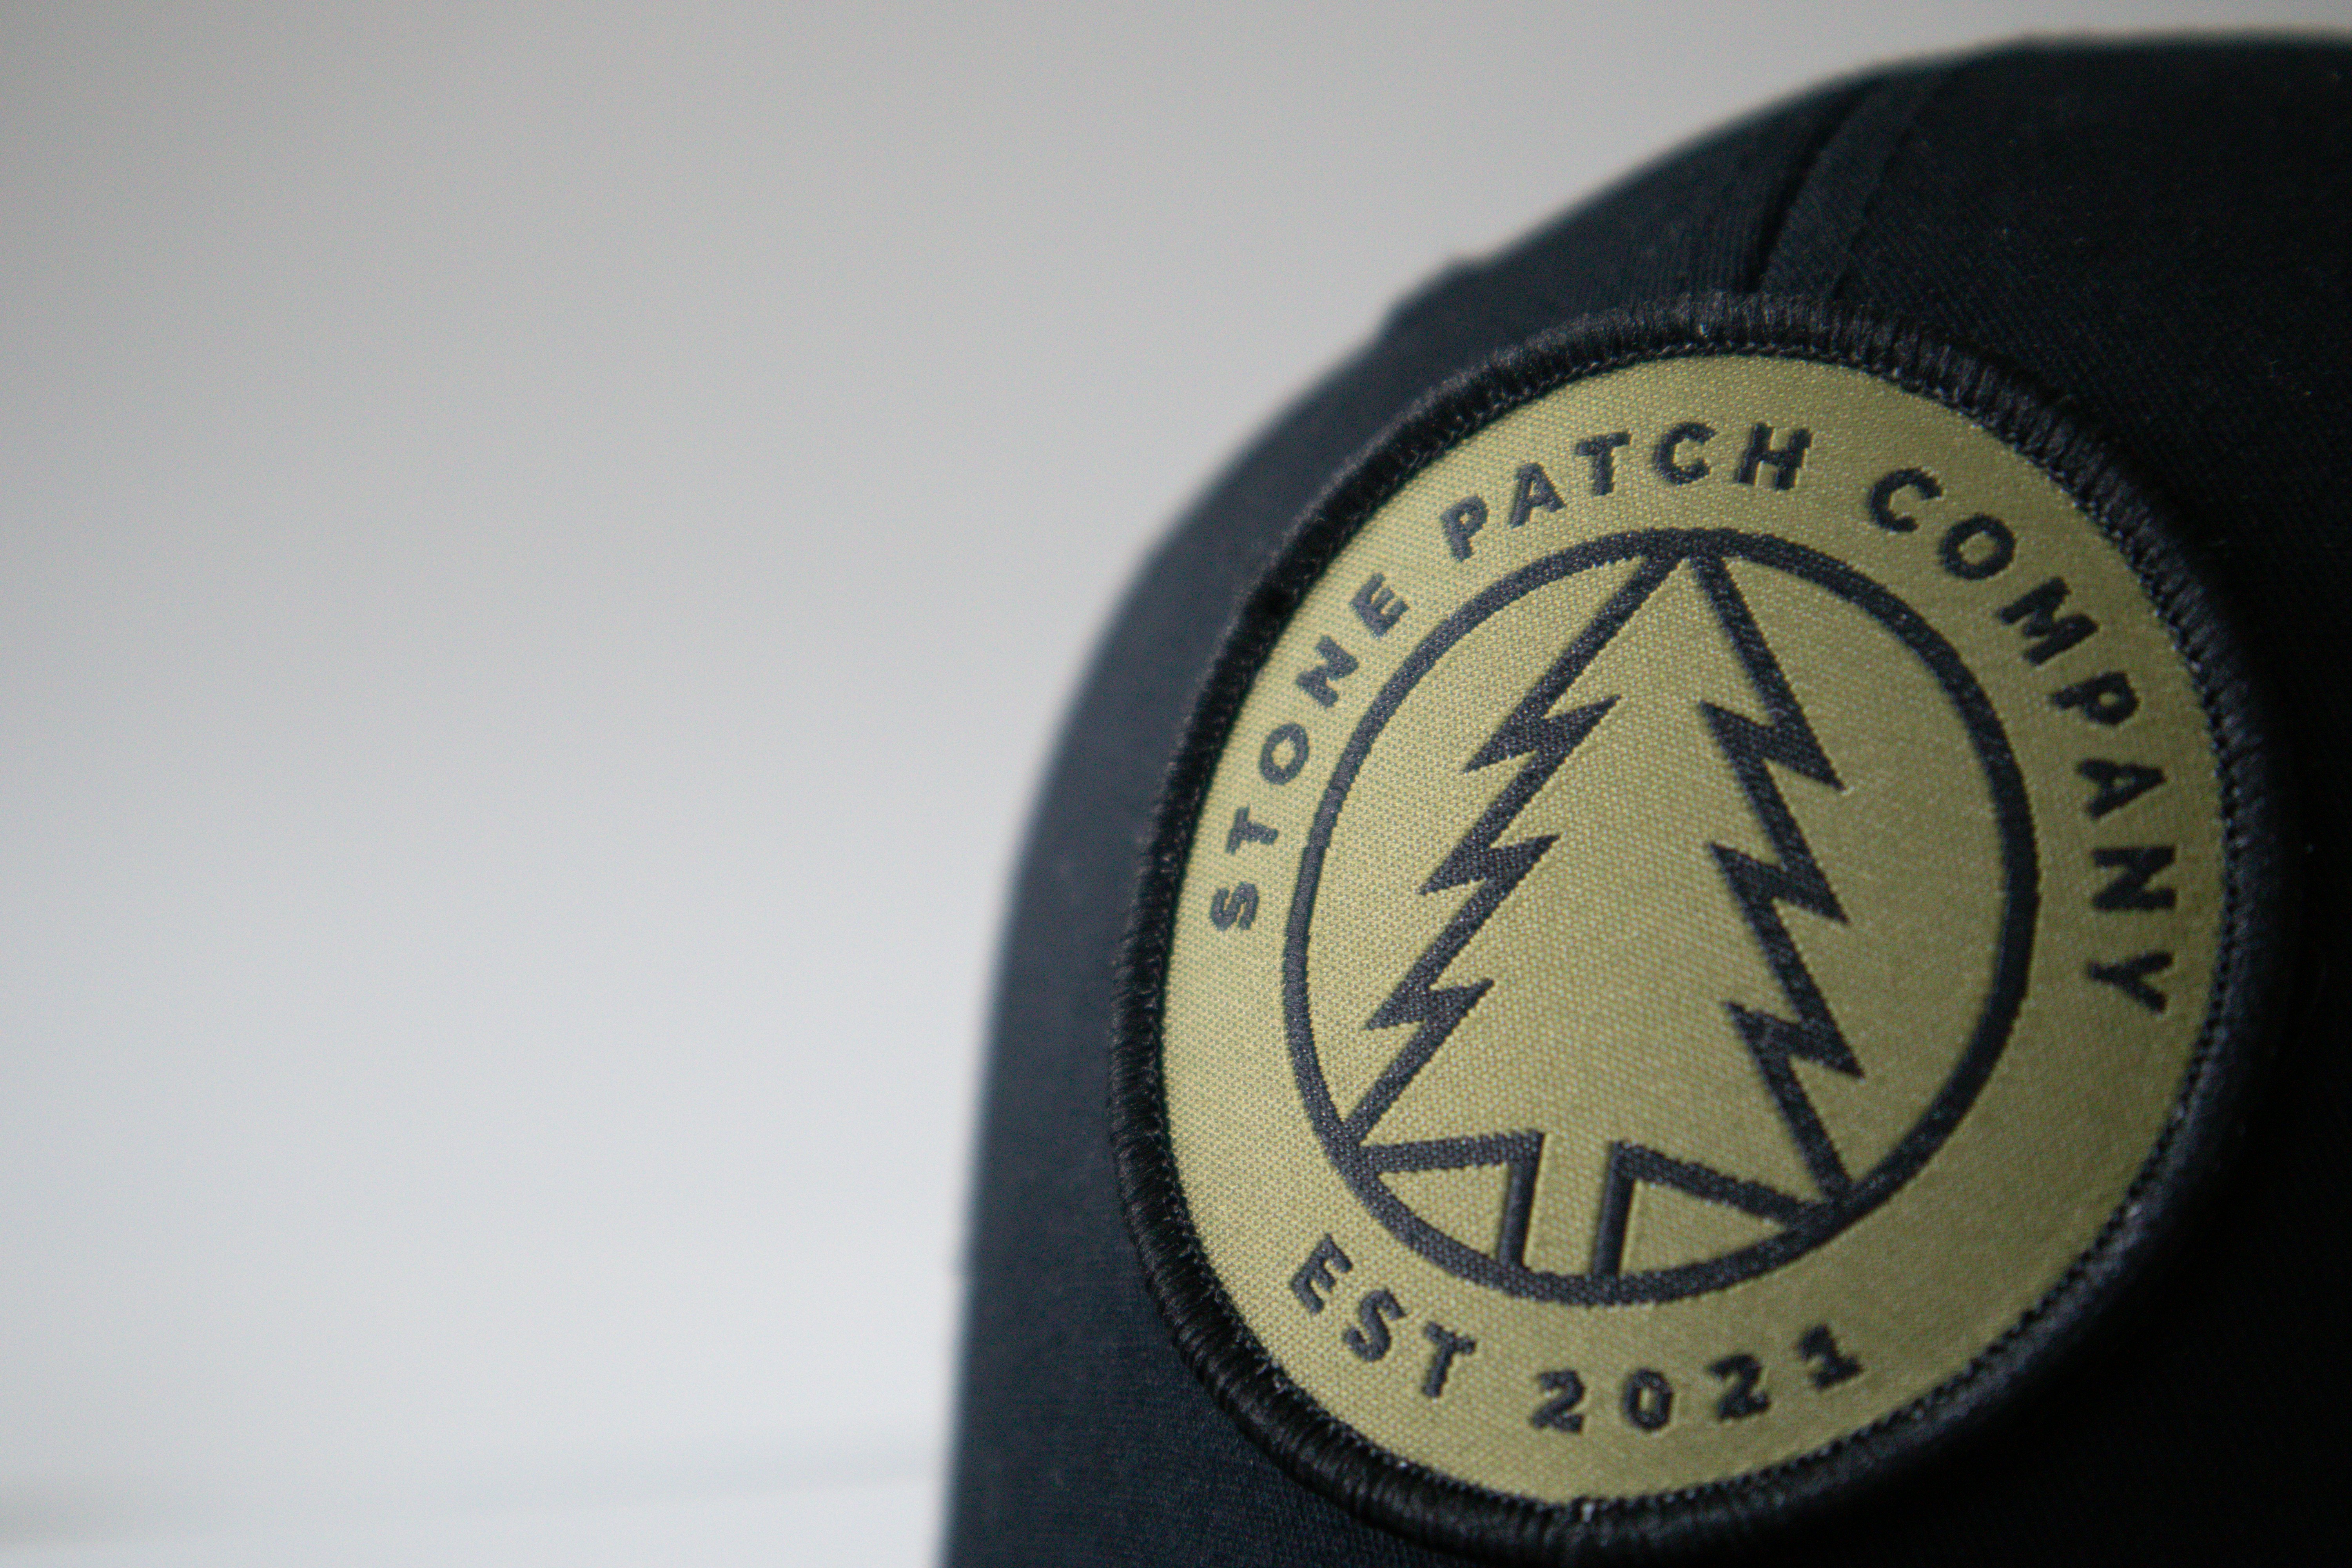 👉 https://stonepatchcompany.com/

Removable patches and tactical patch hats. Inspired by nature, designed by professionals. Wear the perfect patch with the perfect hat on every adventure. #getpatched

🎟️ 10% off with code PATCHPAL10